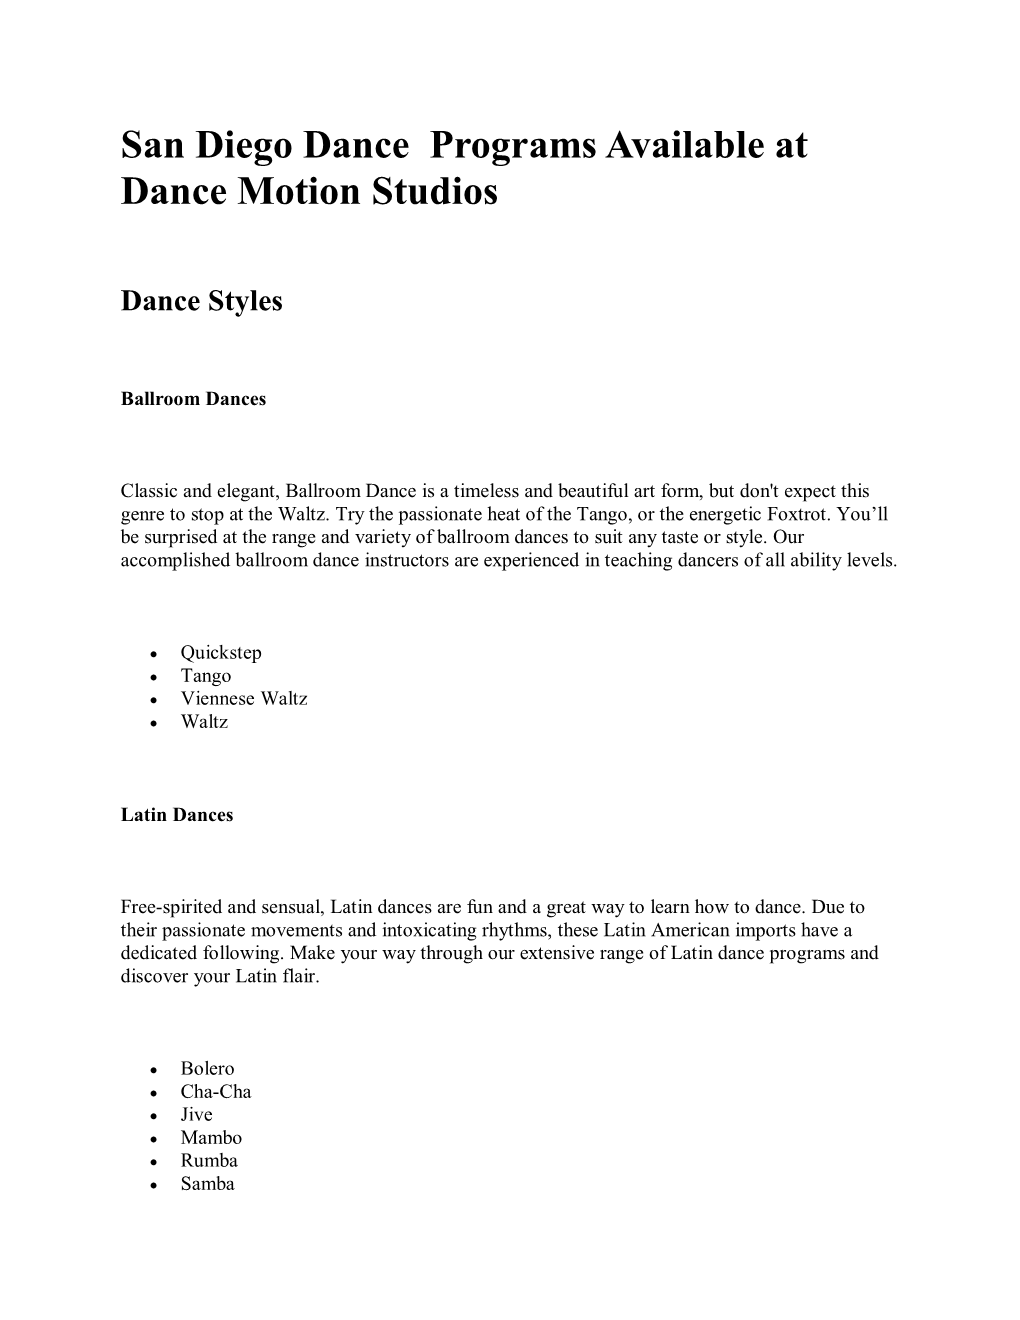 San Diego Dance Programs Available at Dance Motion Studios